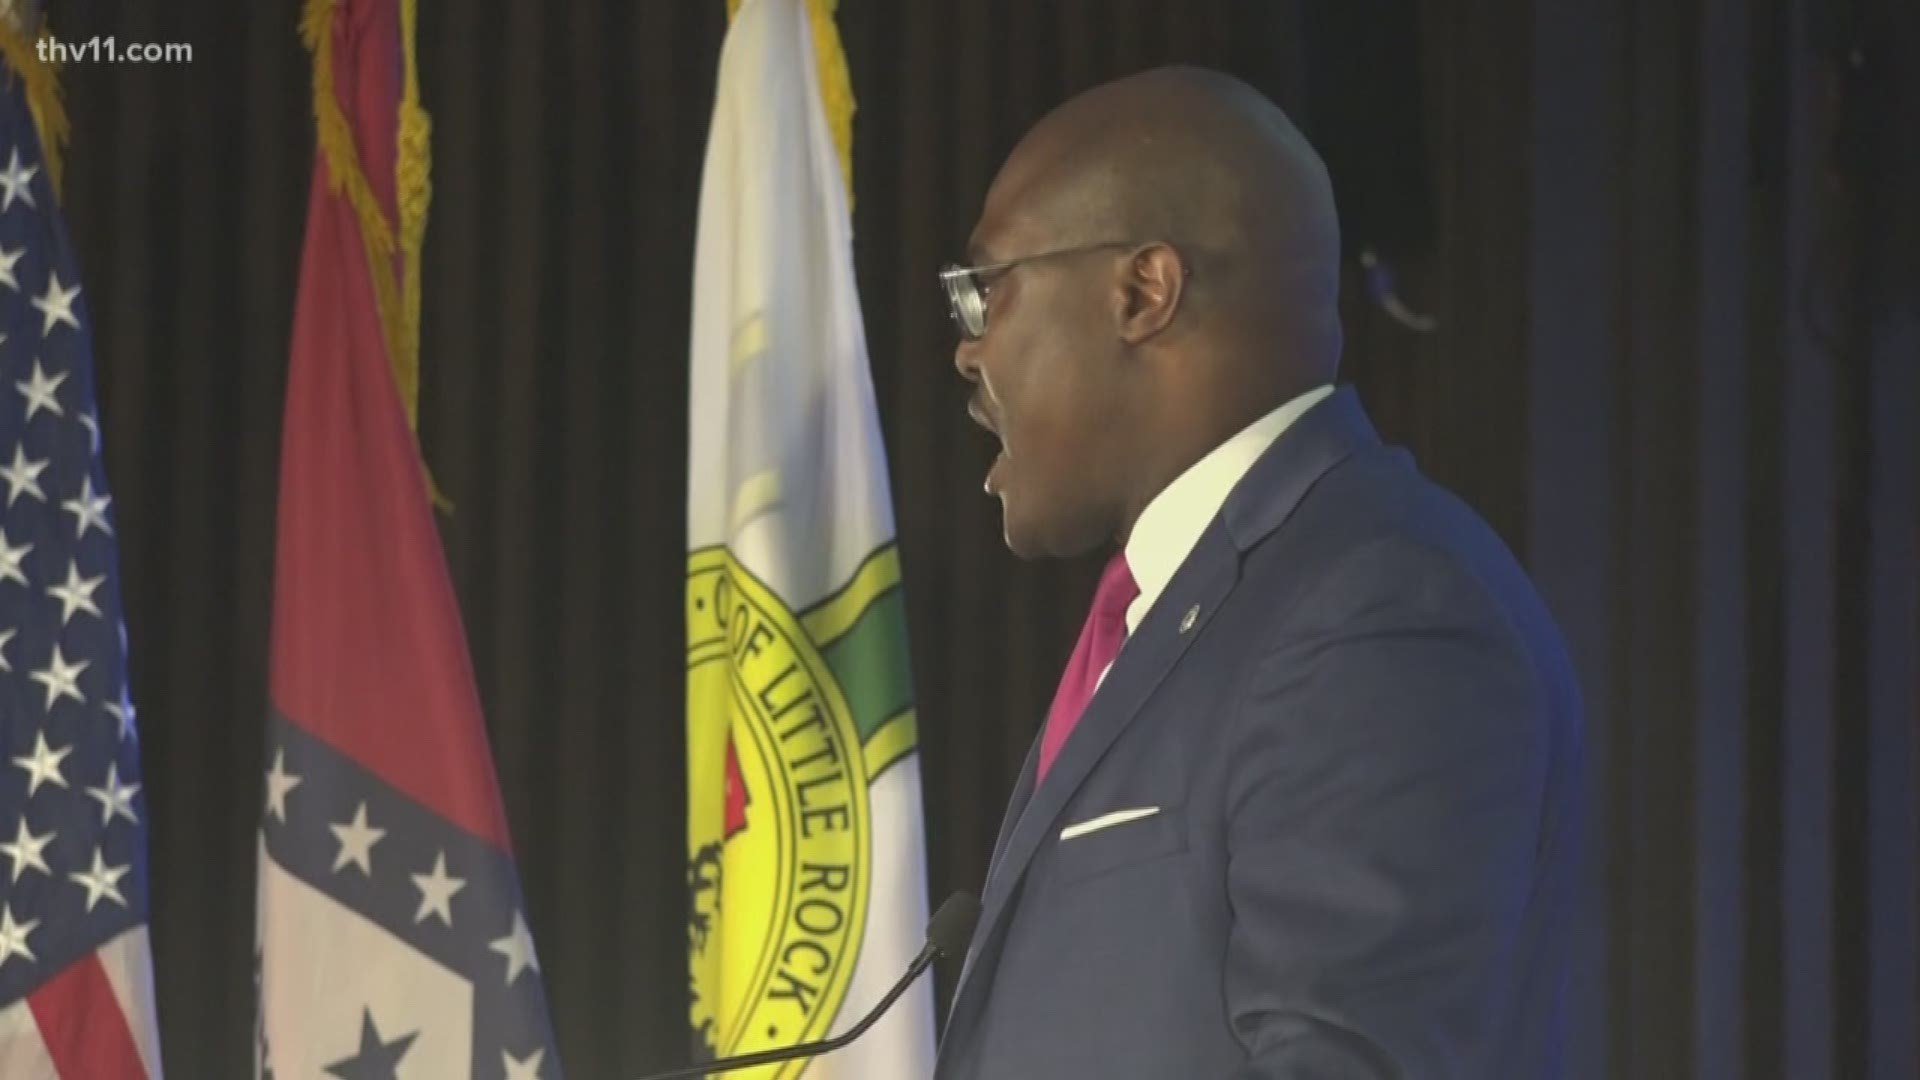 Little Rock Mayor Frank Scott talks education, public safety, and the future of the city in his first state of the city address.